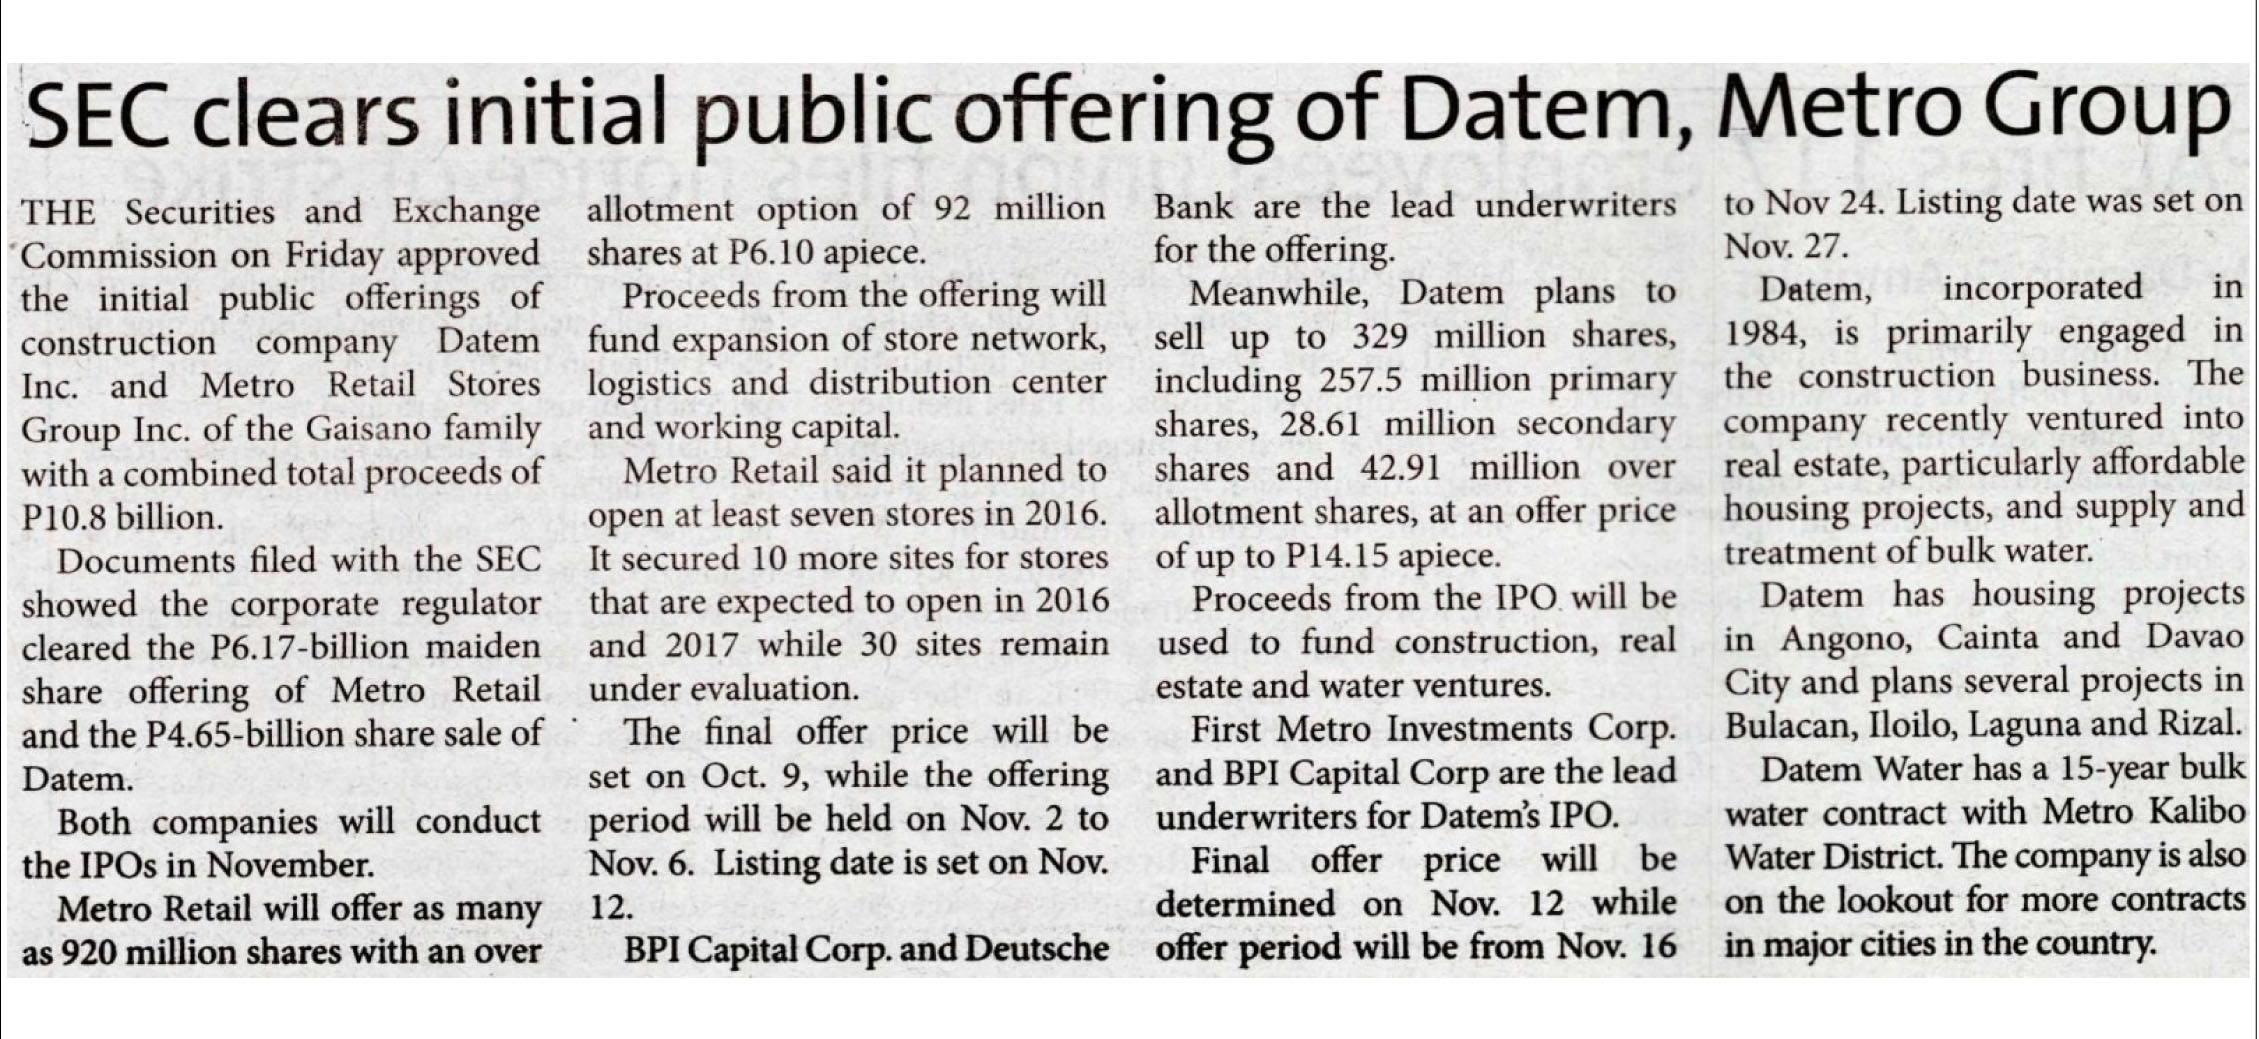 SEC clears initial public offering of Datem Metro Group The Standard